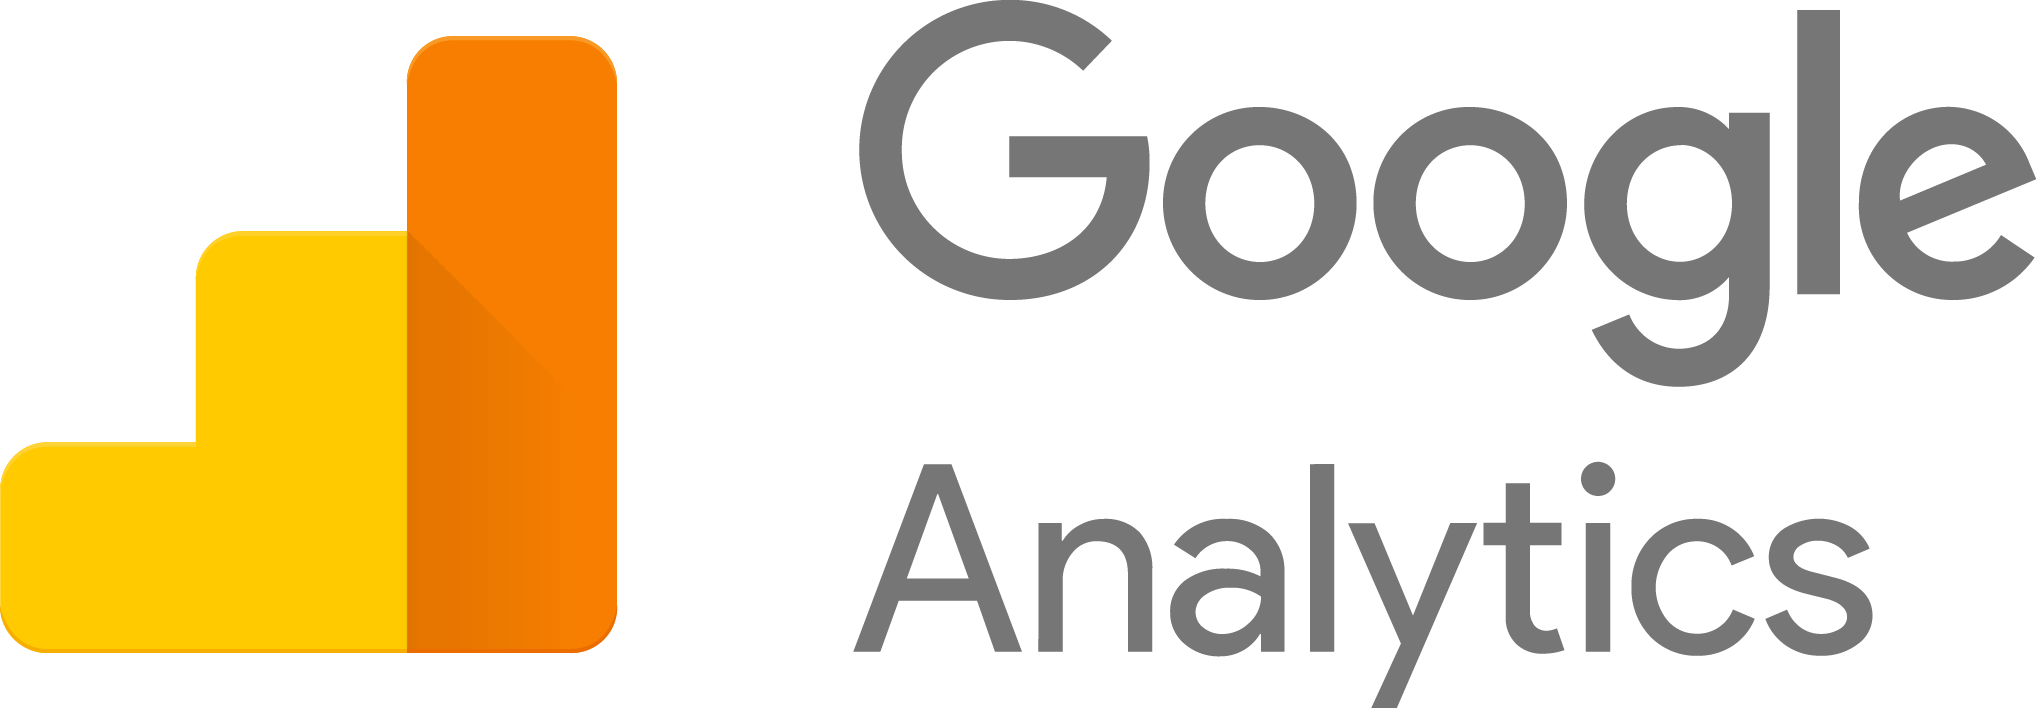 Collection of Google Analytics Logo PNG  PlusPNG